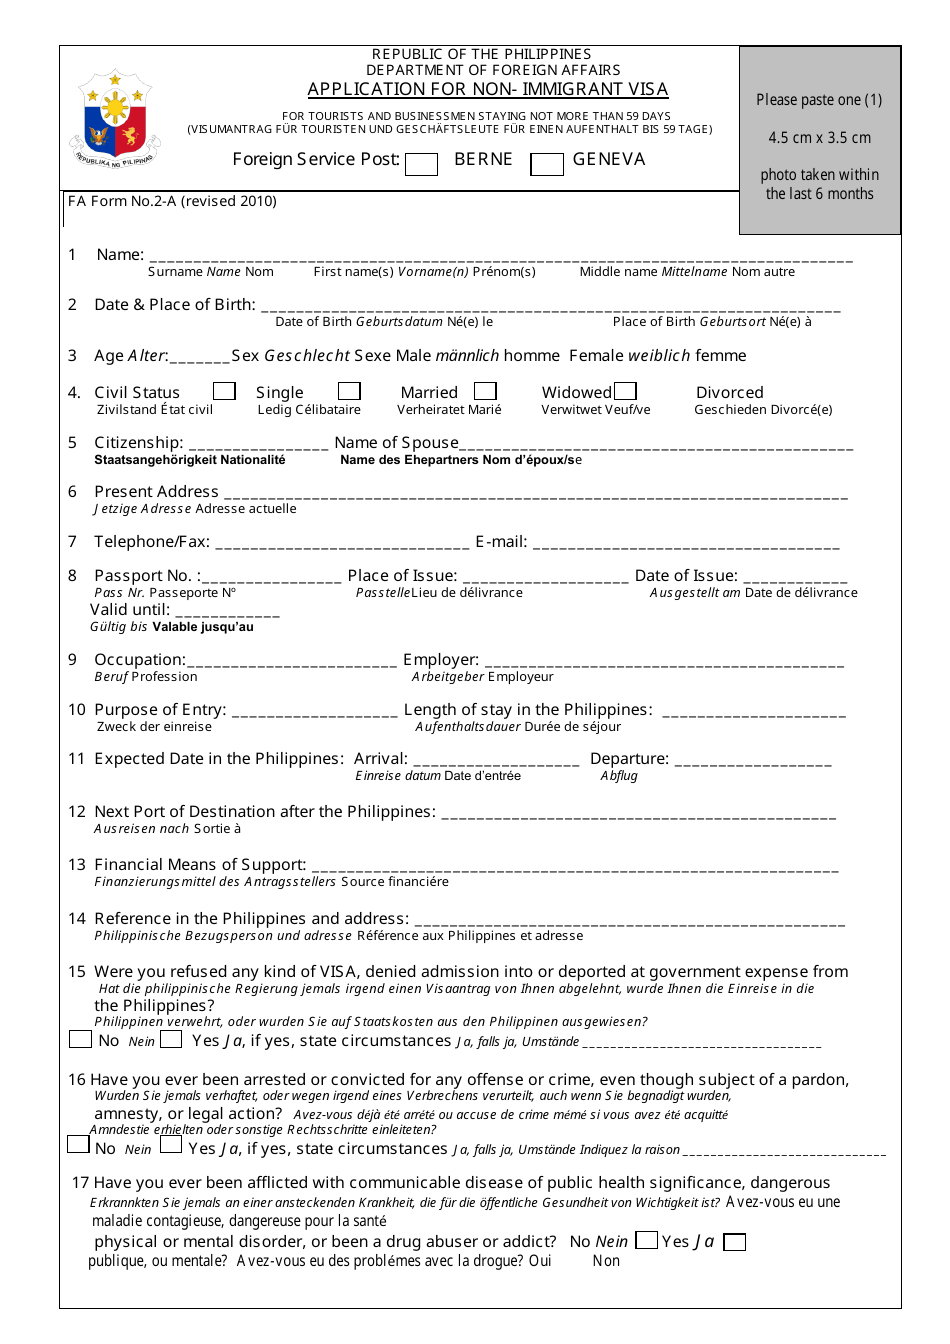 FA Form 2-A Application for Non-immigrant Visa - Philippines, Page 1